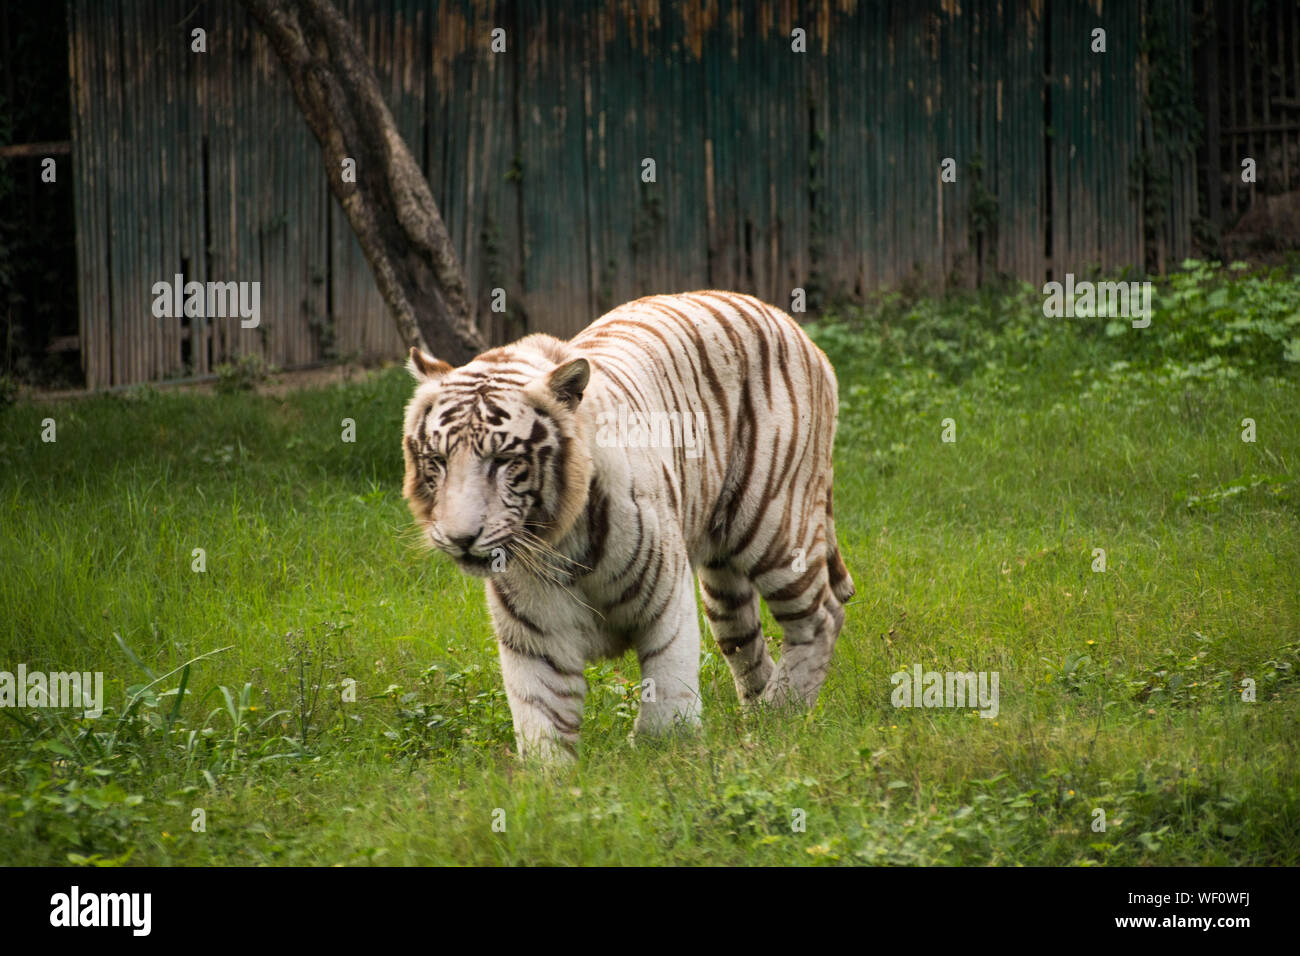 The majestic White Tiger walking around a a green grassed area where it is preserved in the Zoo in Delhi Stock Photo